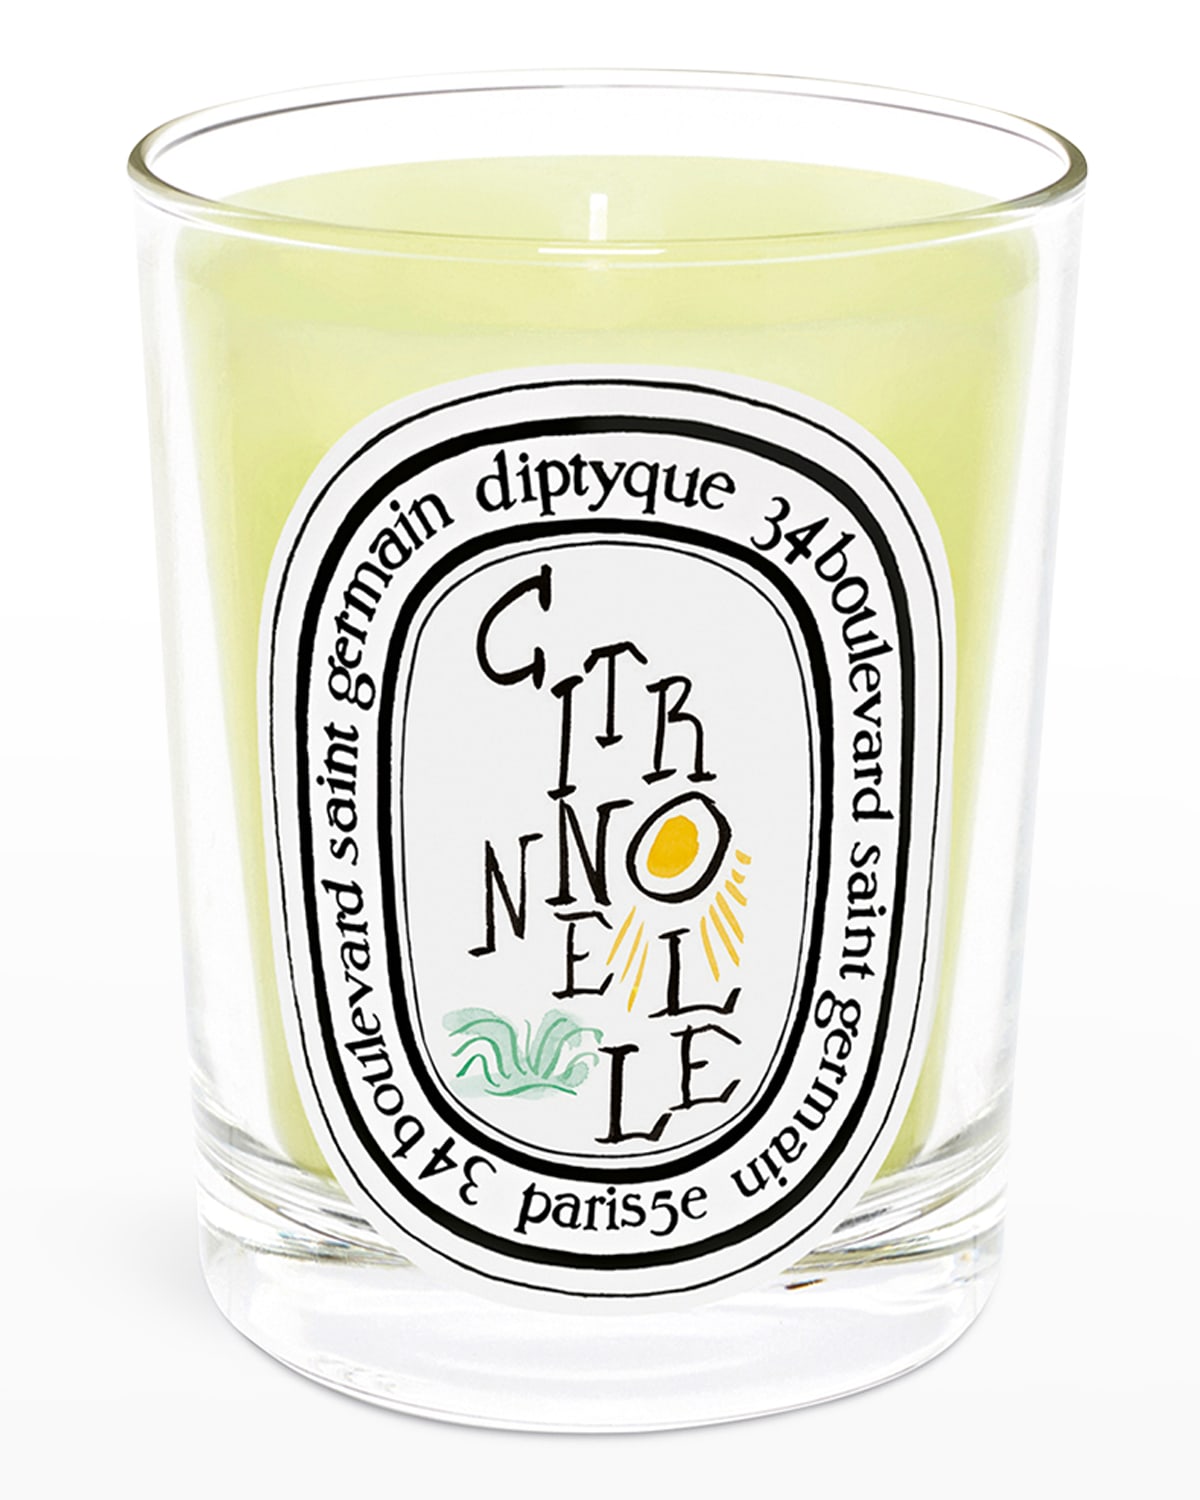 NEW IN BOX Diptyque City Candle NEW YORK LIMITED EDITION 6.5oz 